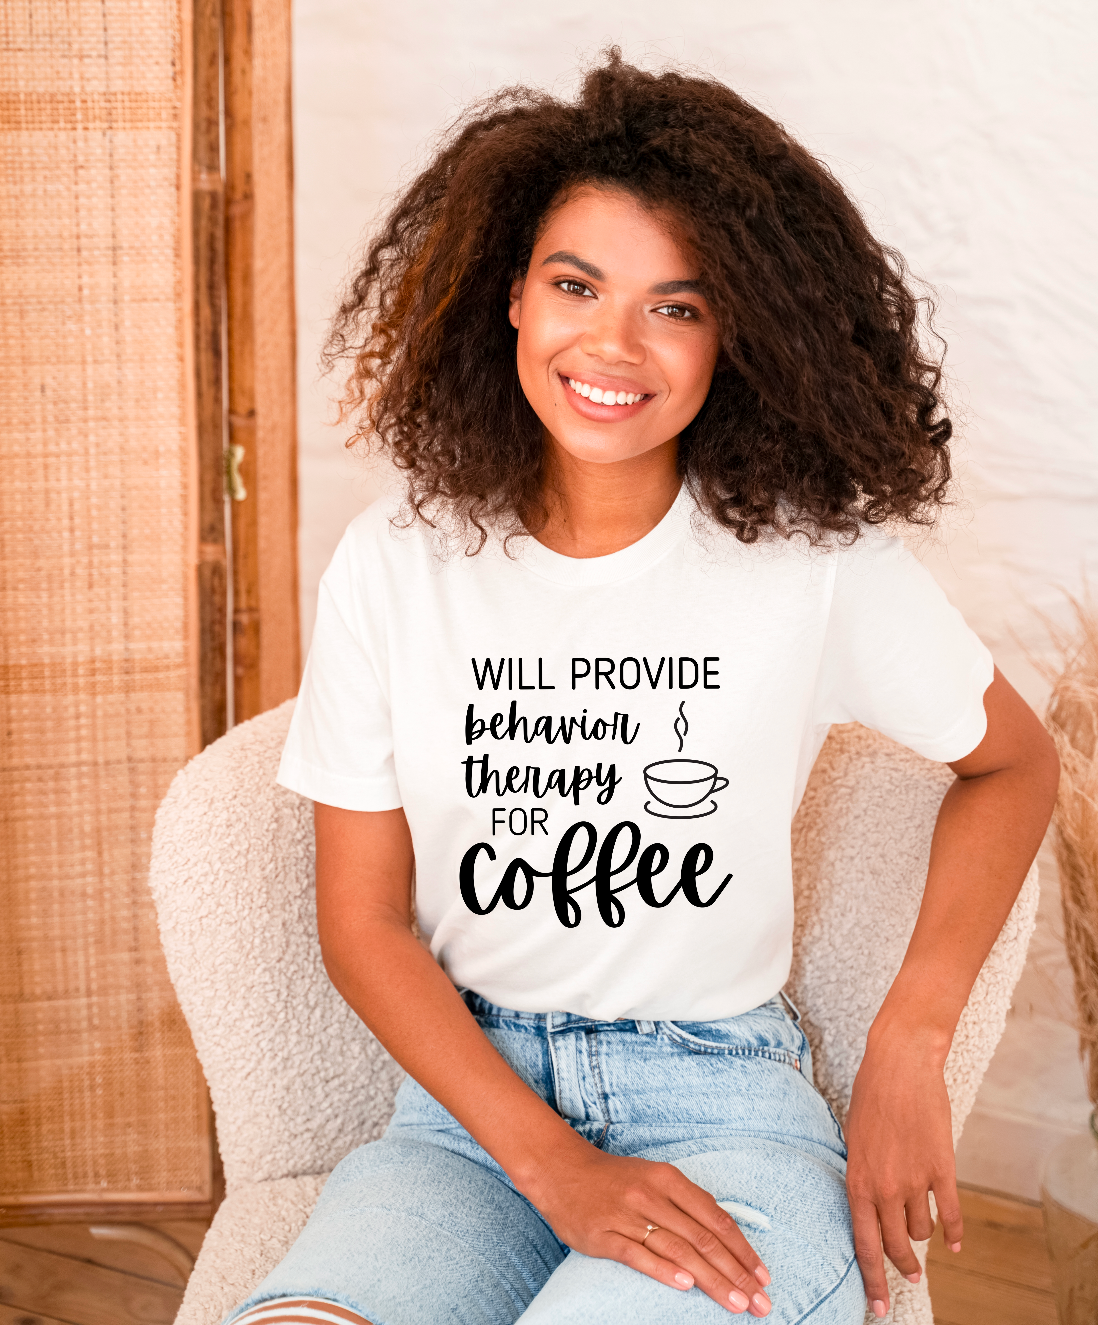 Will Provide Behavior Therapy for Coffee #2 Shirt | Applied Behavior Analysis | ABA Shirt | behavior analyst | Special Education